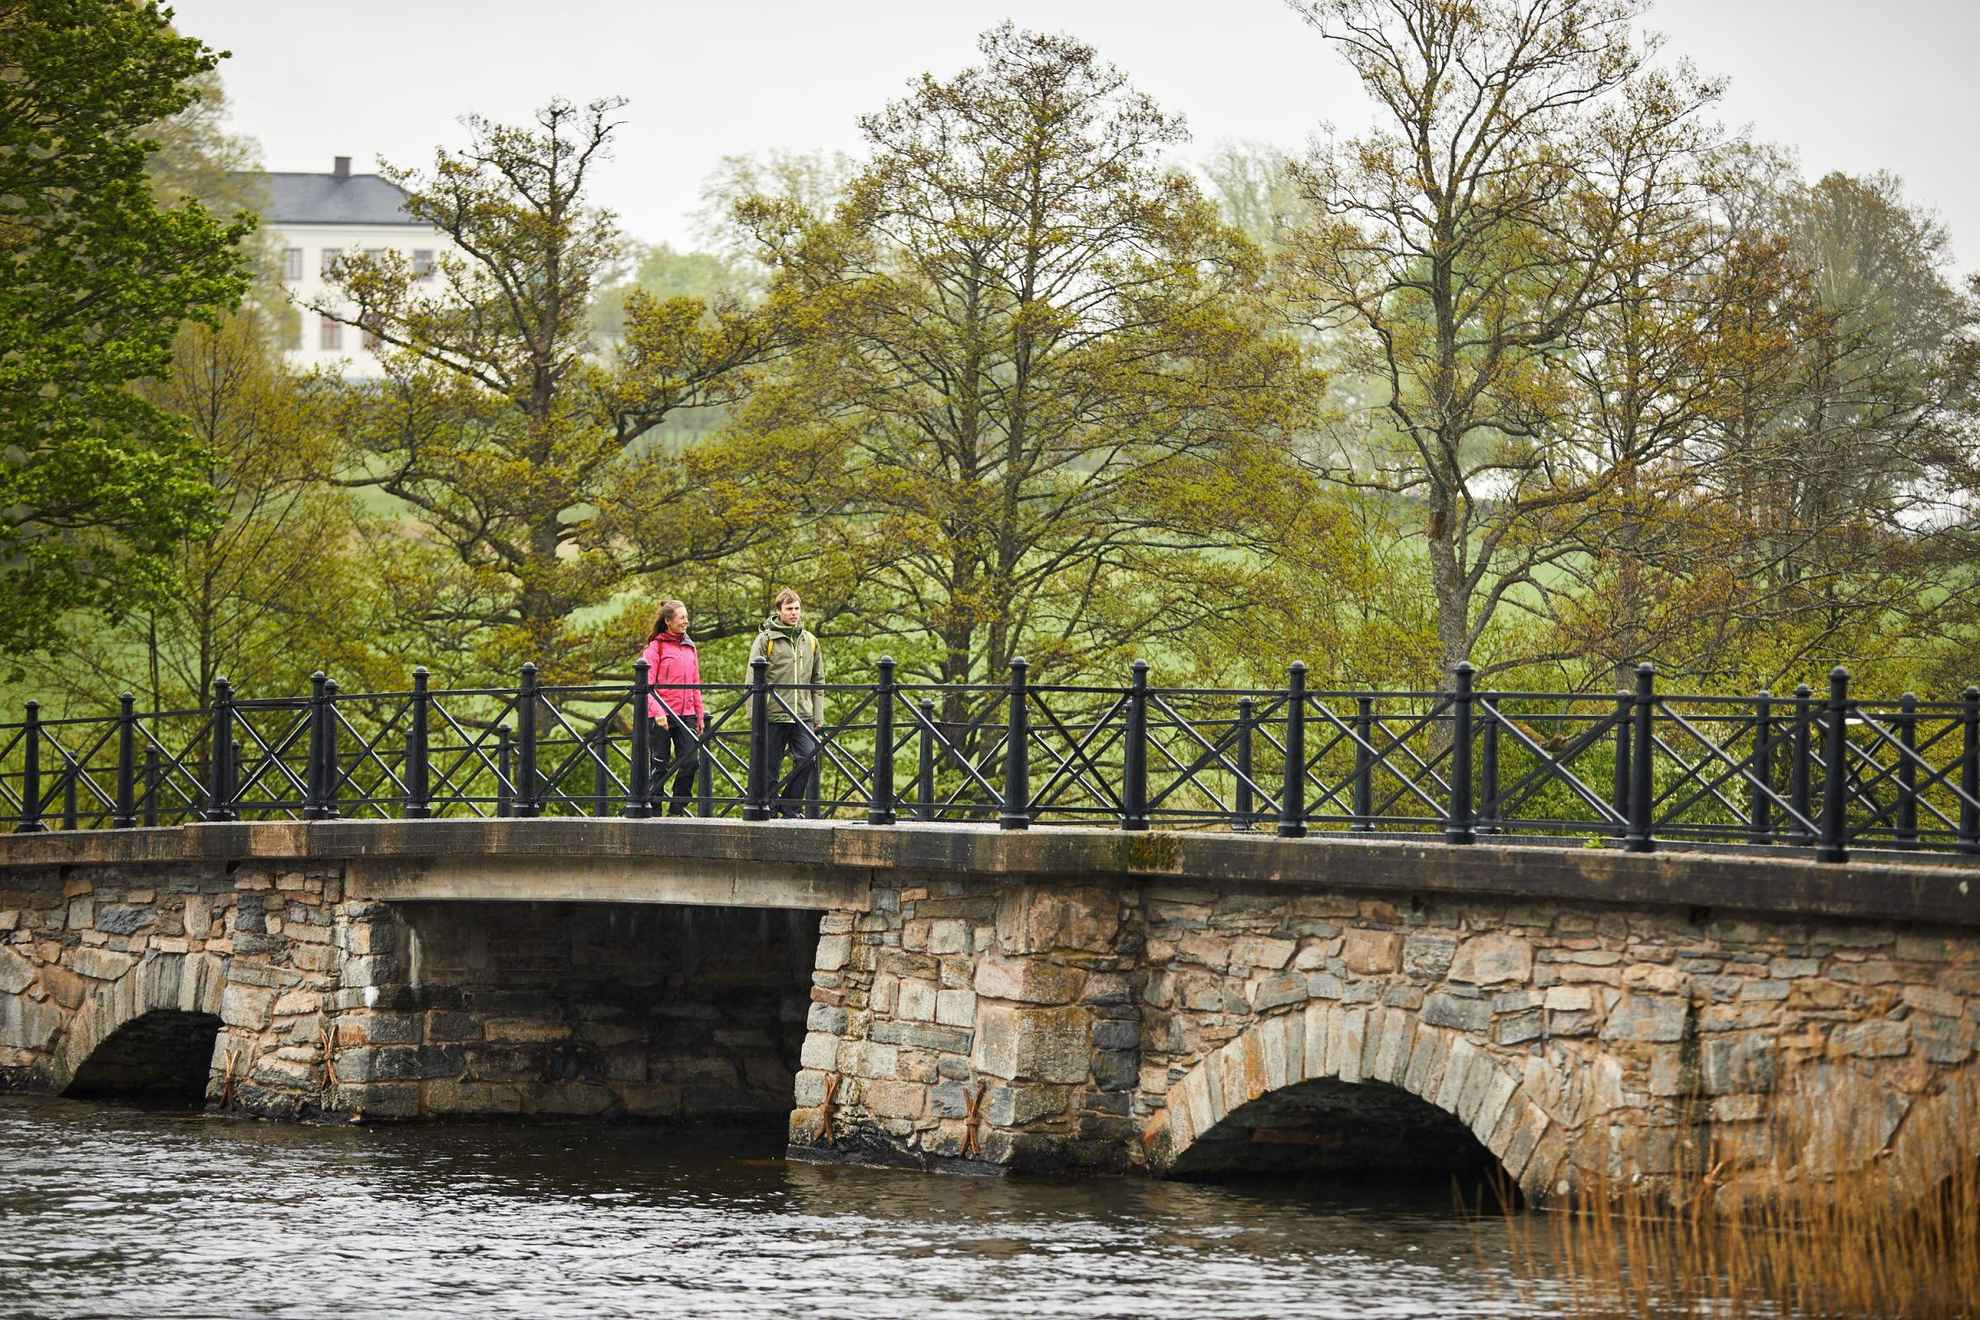 A man and a woman walking on an old stone bridge over a river. There are trees on the riverside and a white house in the background.